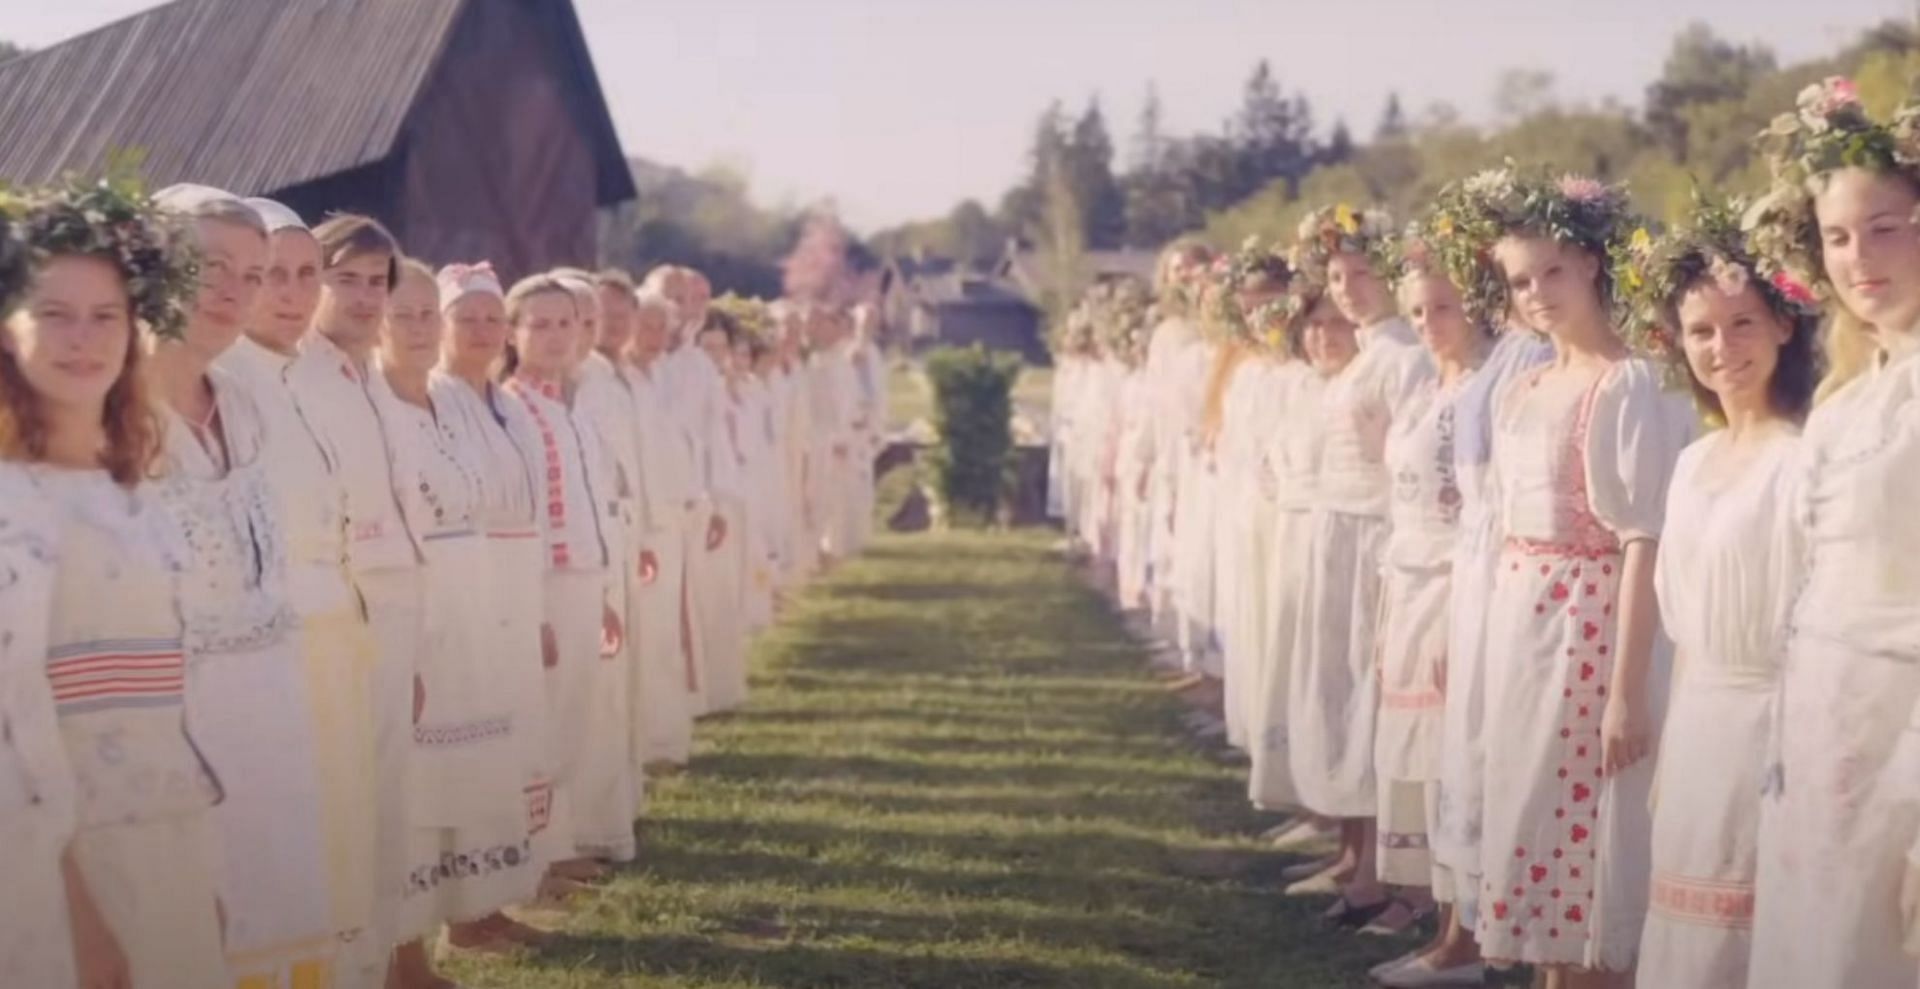 Midsommar ending explained: Why was Christian burned alive in the end? Meaning and symbol explored (Image Via A24 movie)